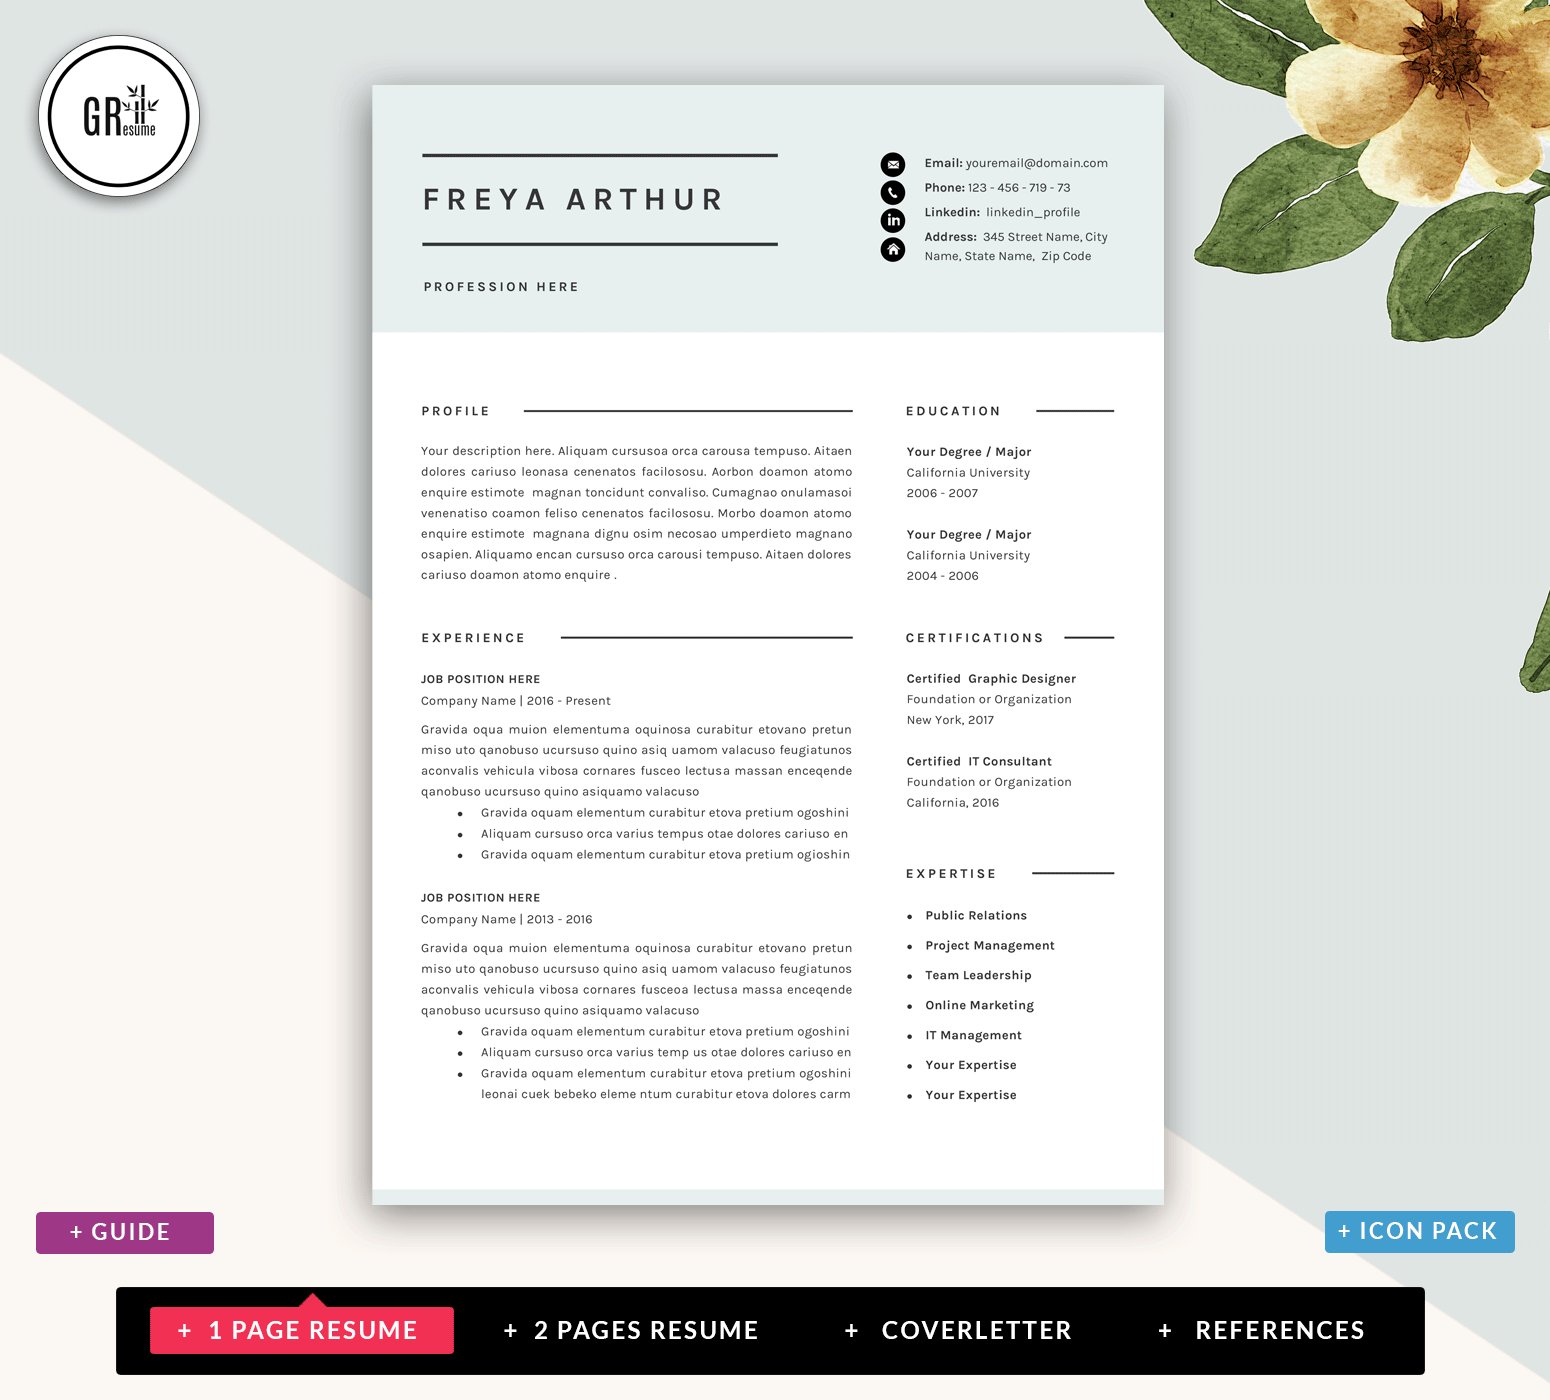 Professional CV Resume Templates preview image.